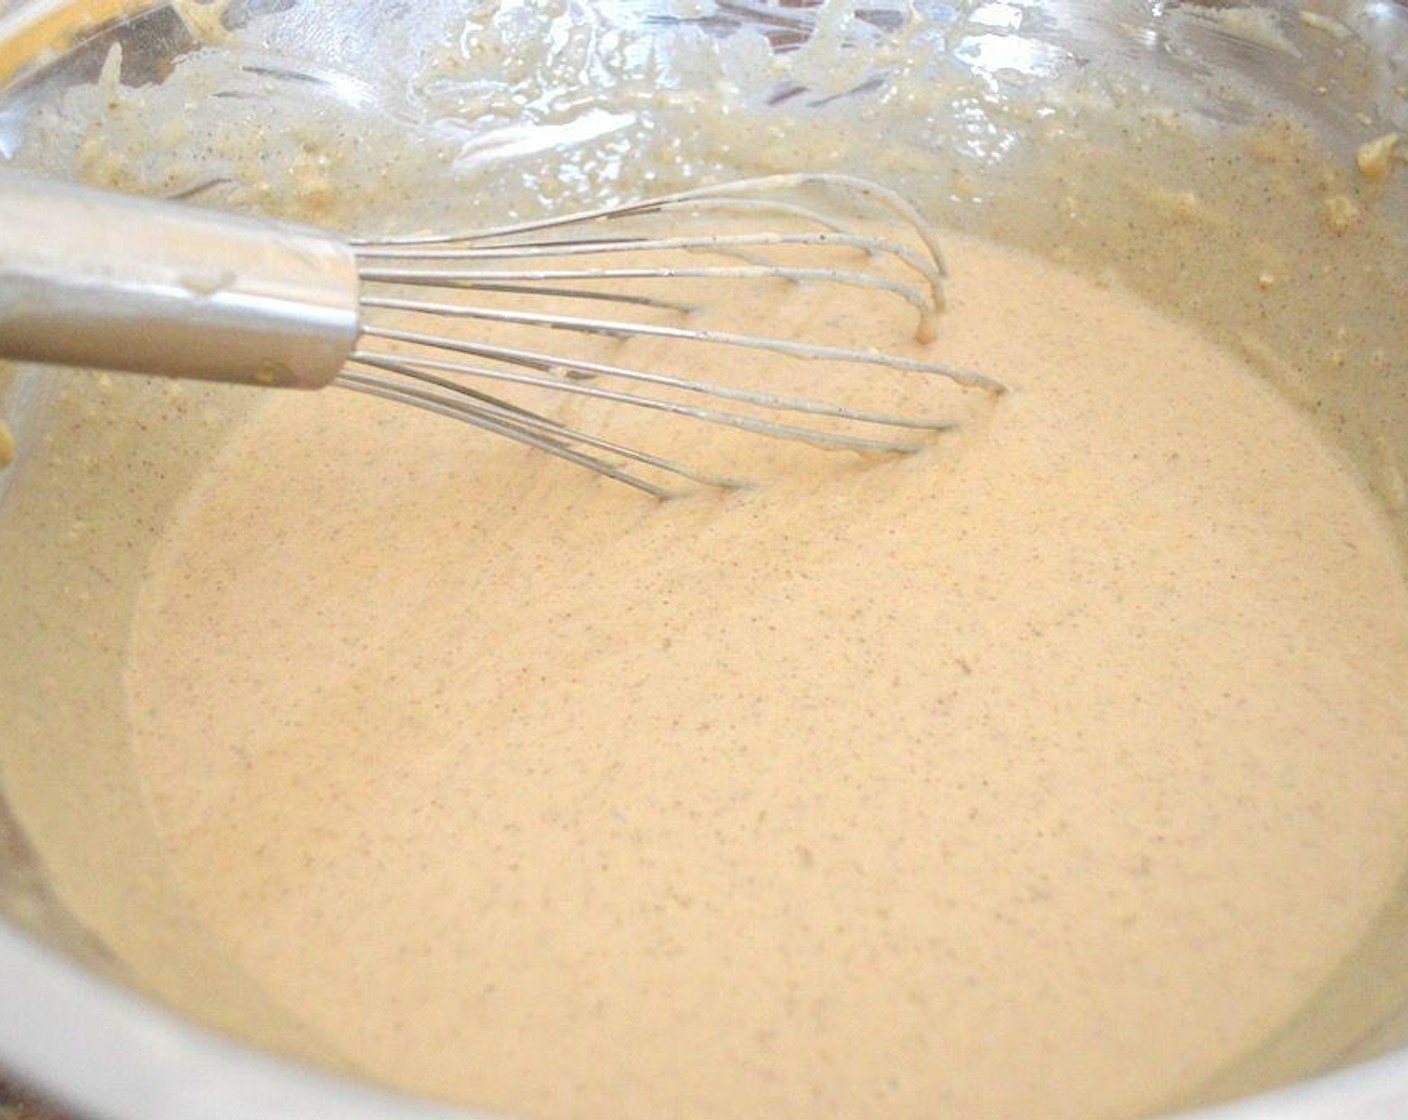 step 4 Whisk the Milk (2 cups), Butter (1/2 cup), Eggs (2), and Rose Water (1/2 tsp) together in another bowl. Pour the wet ingredients into the dry ingredients and whisk it all together thoroughly until smooth.